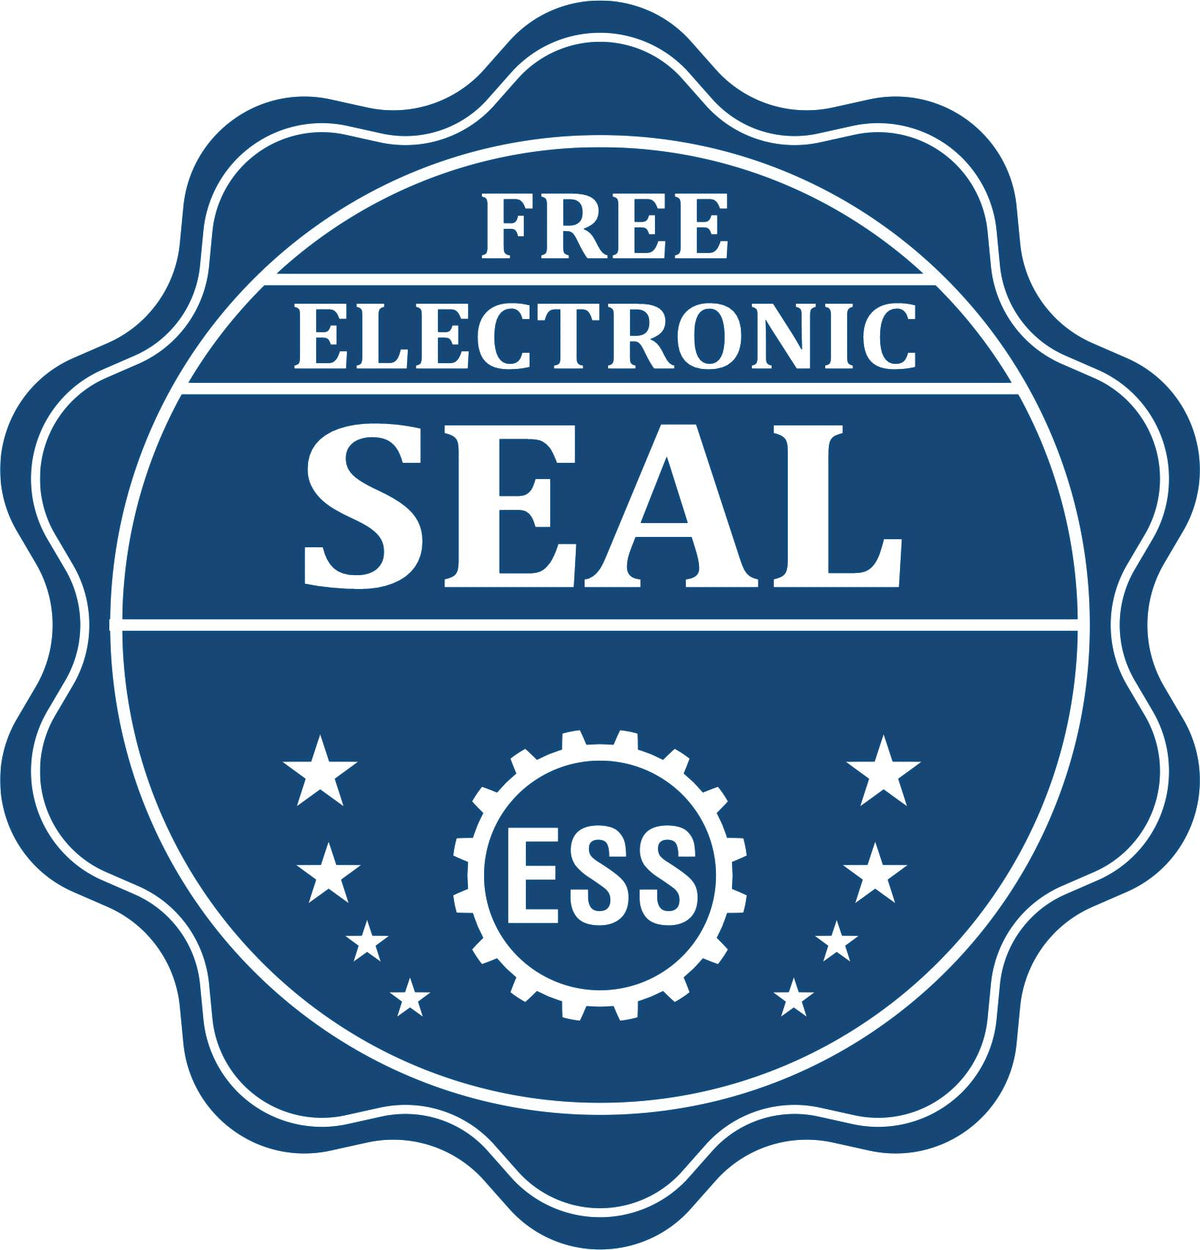 A badge showing a free electronic seal for the Long Reach Pennsylvania PE Seal with stars and the ESS gear on the emblem.